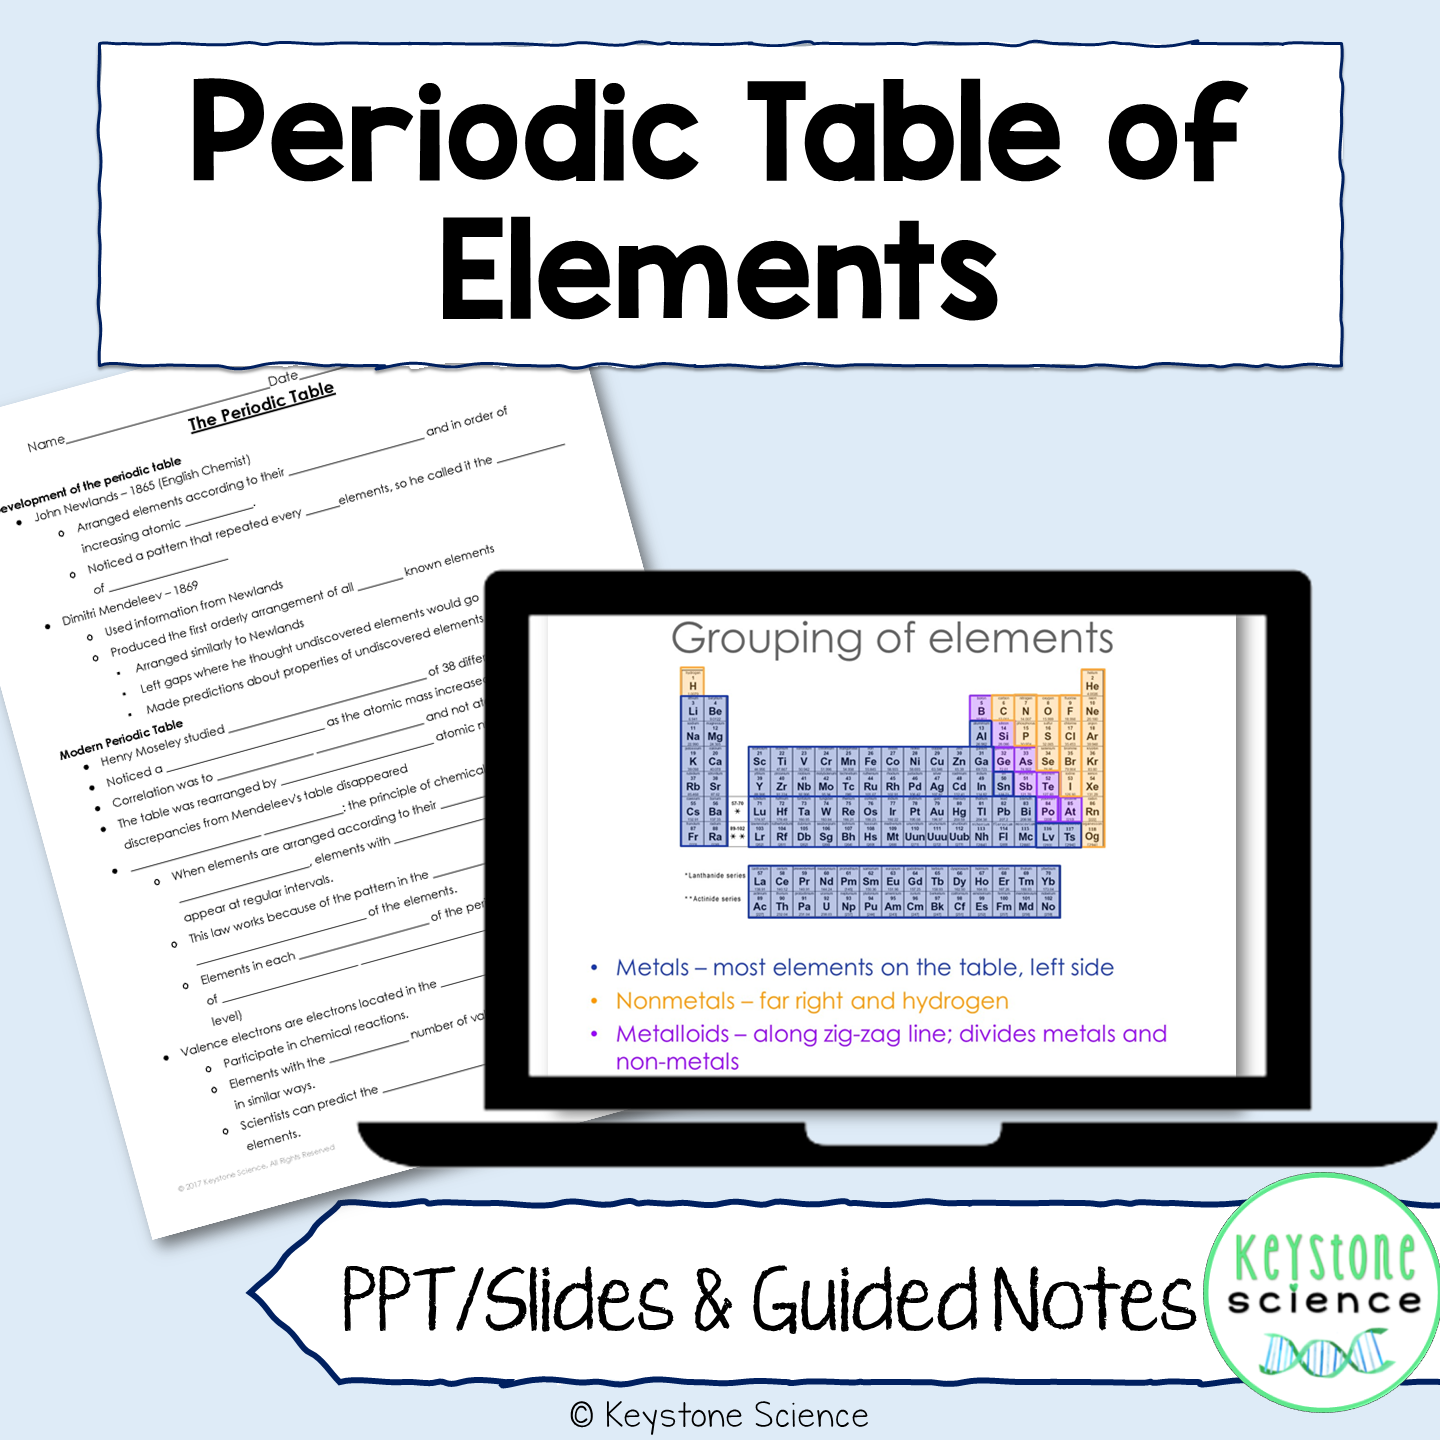 Periodic Table Organization And Trends